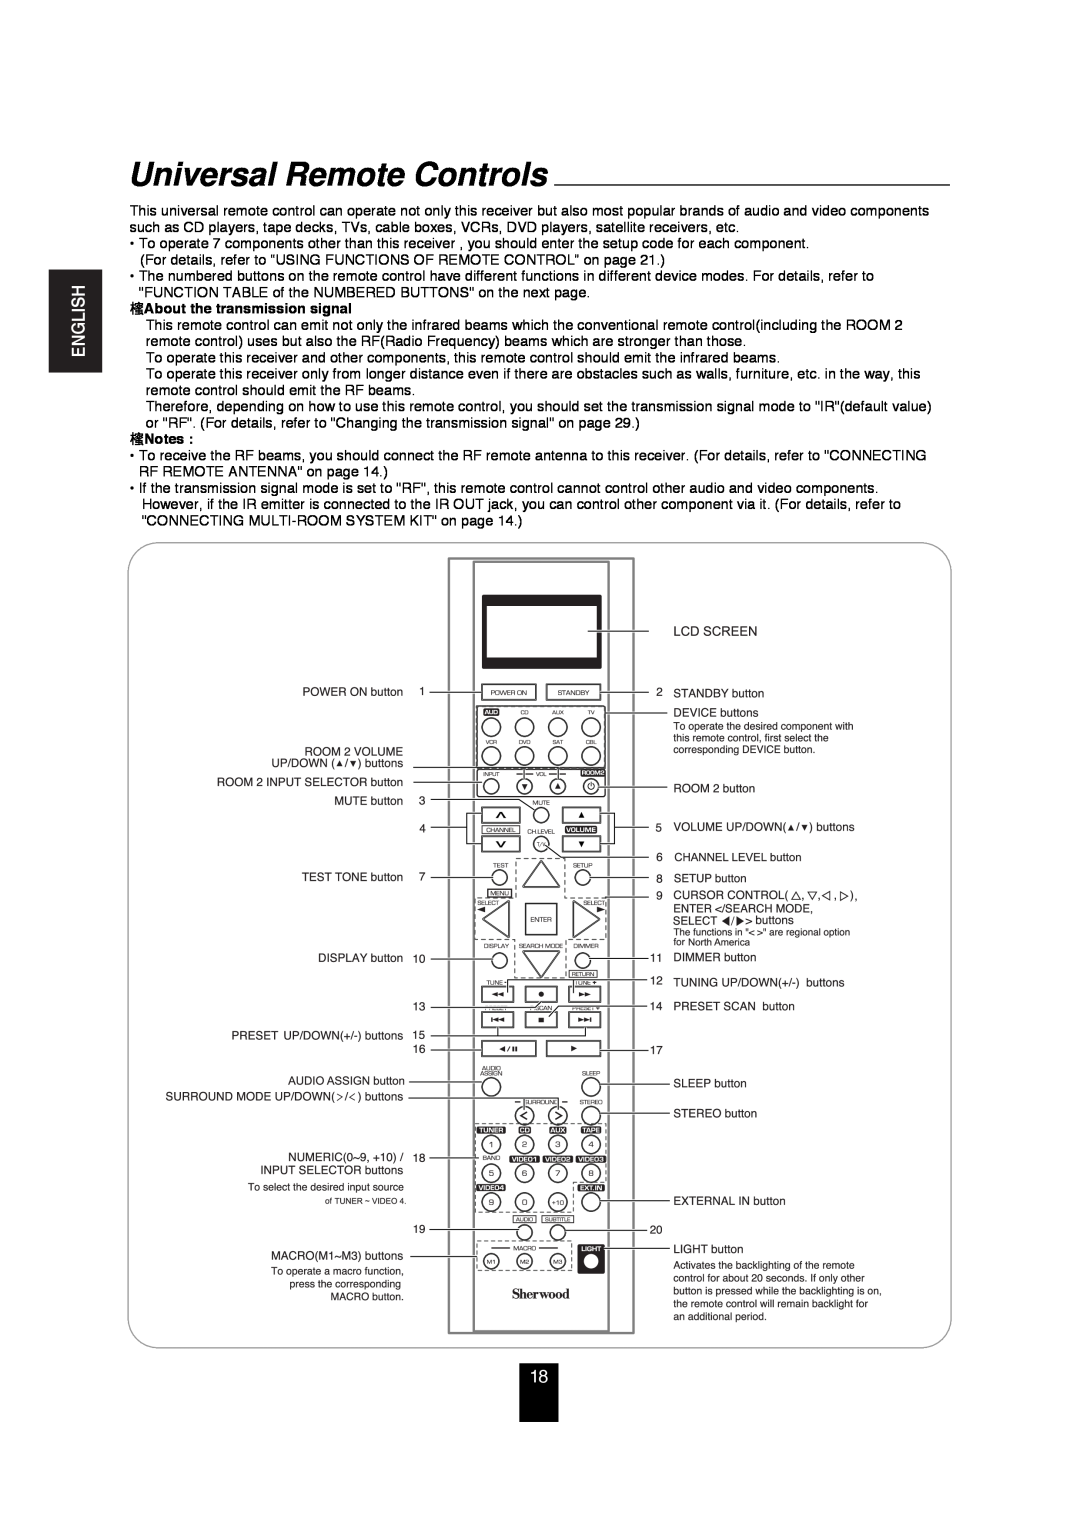 Sherwood R-872 manual Universal Remote Controls, English, About the transmission signal 